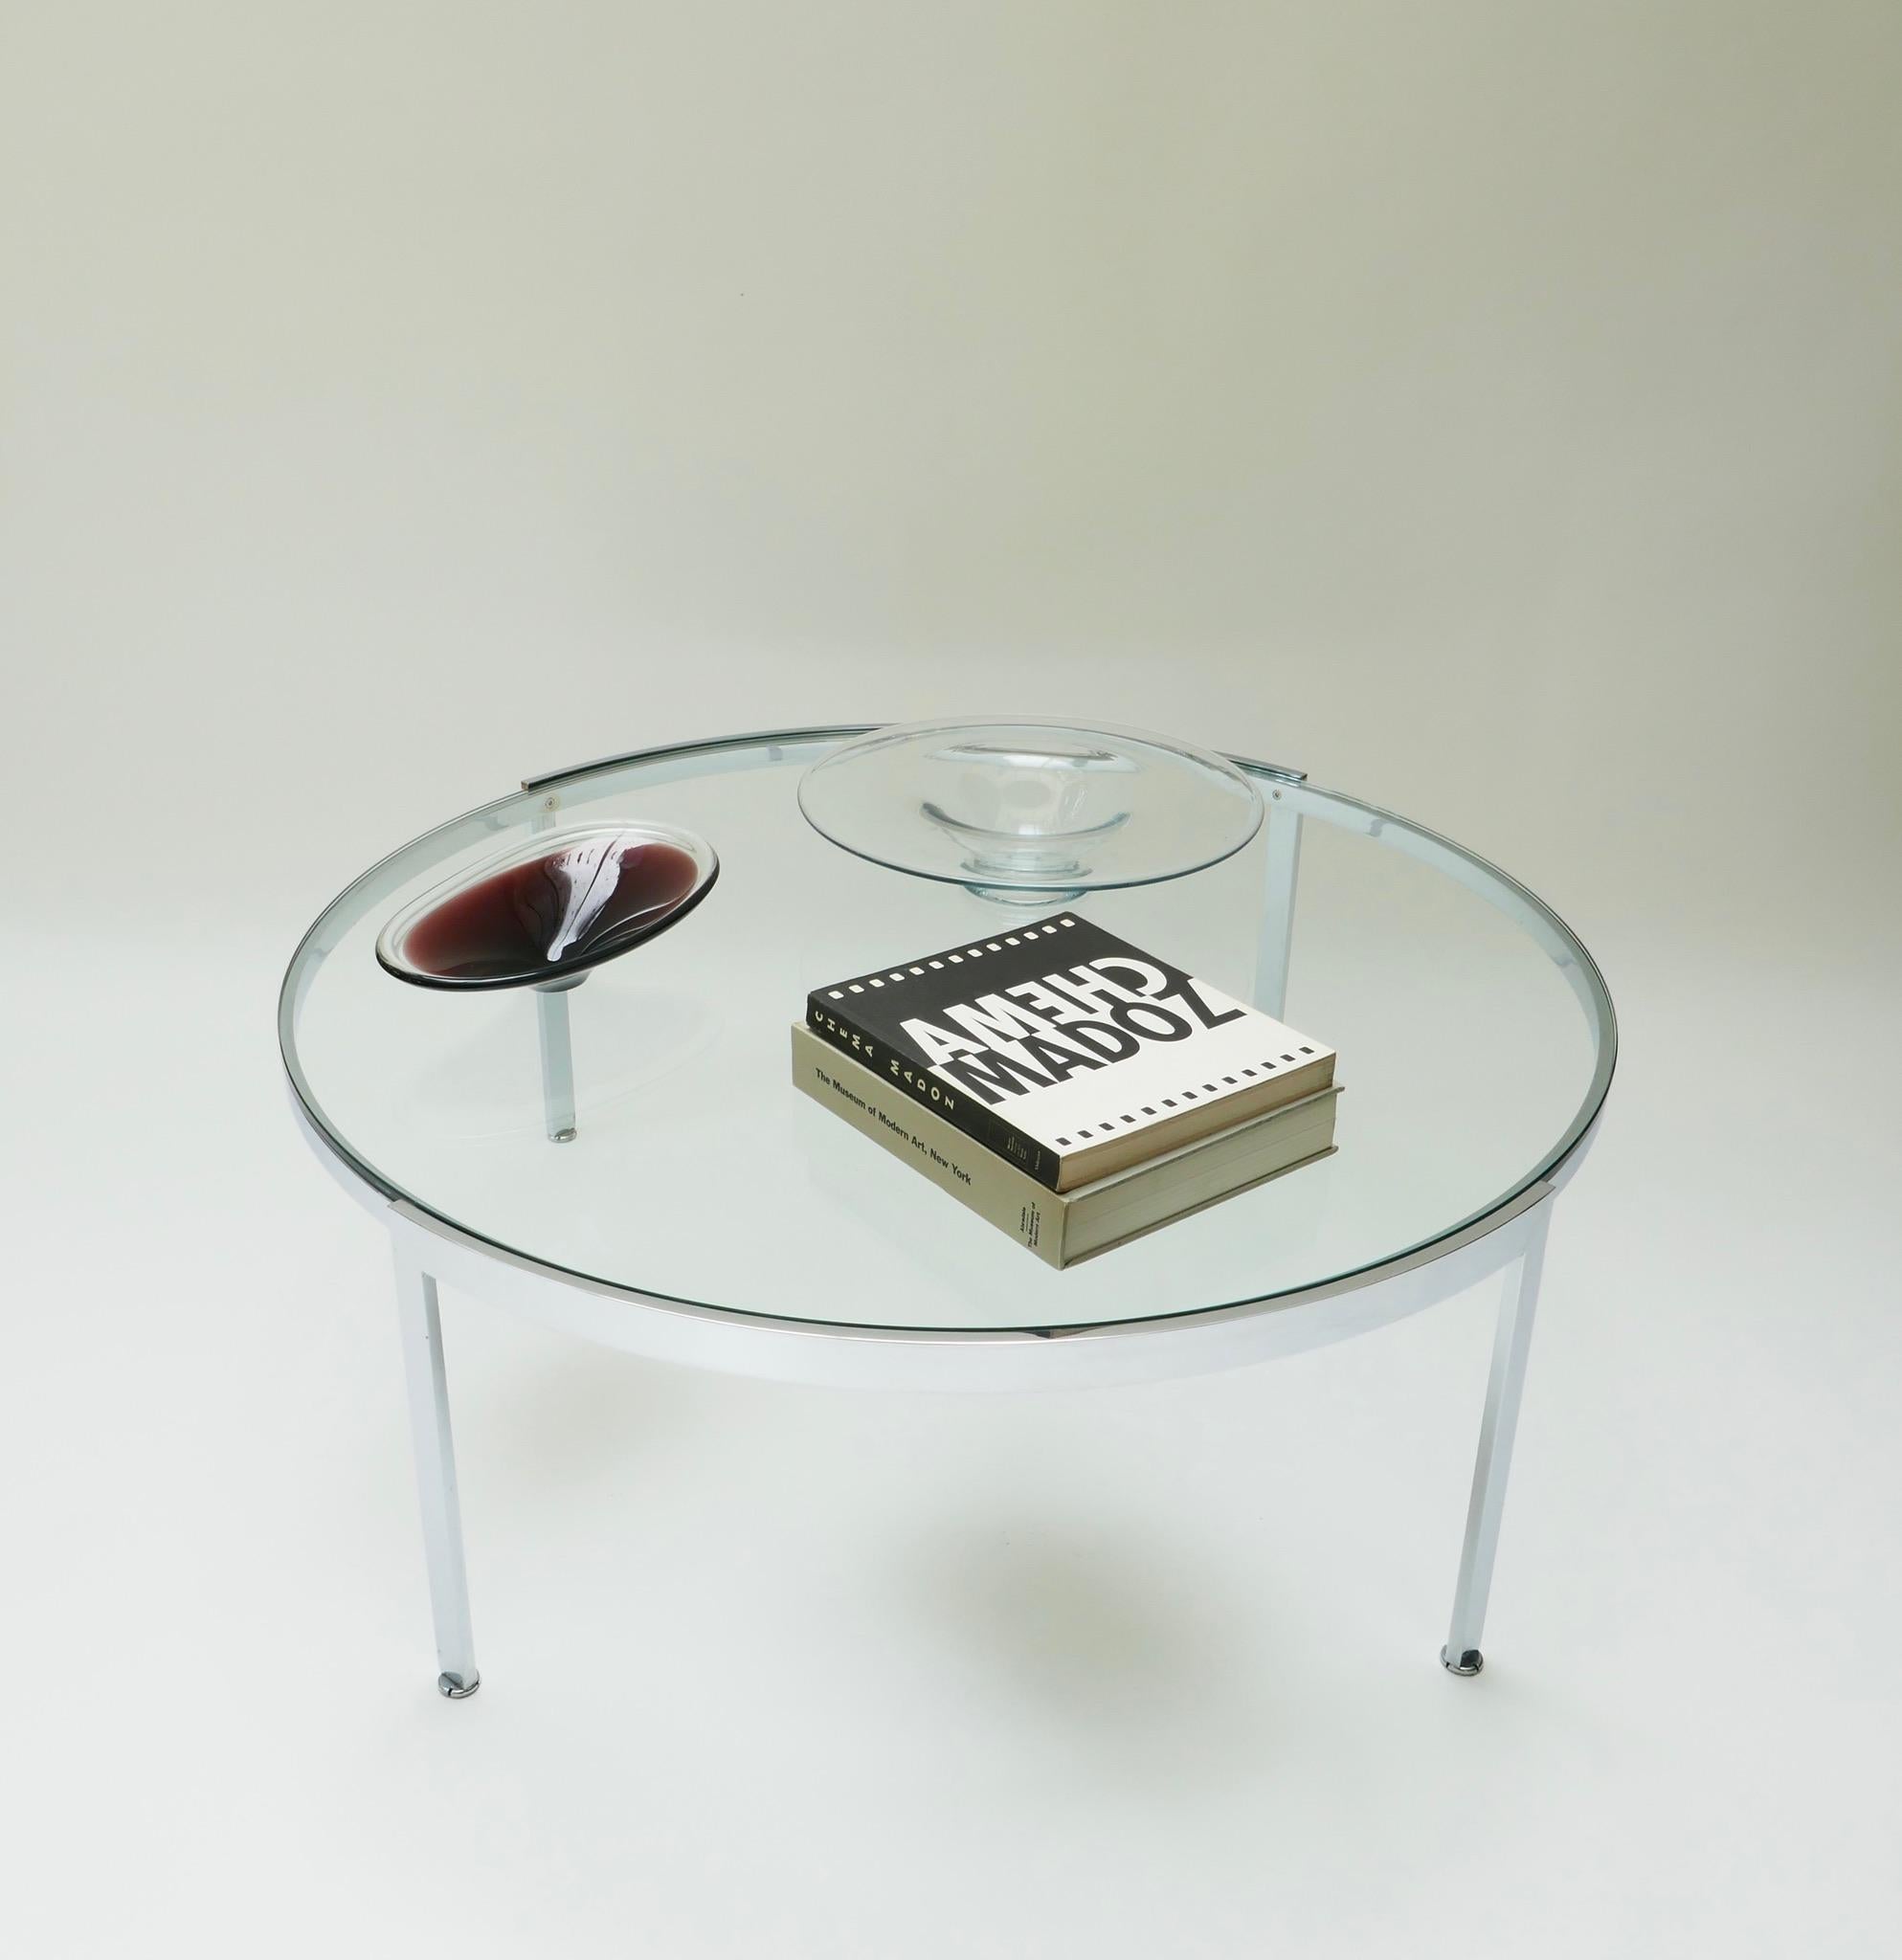 Large Chrome and Glass Round Low Table, Italy, 1970s For Sale 2